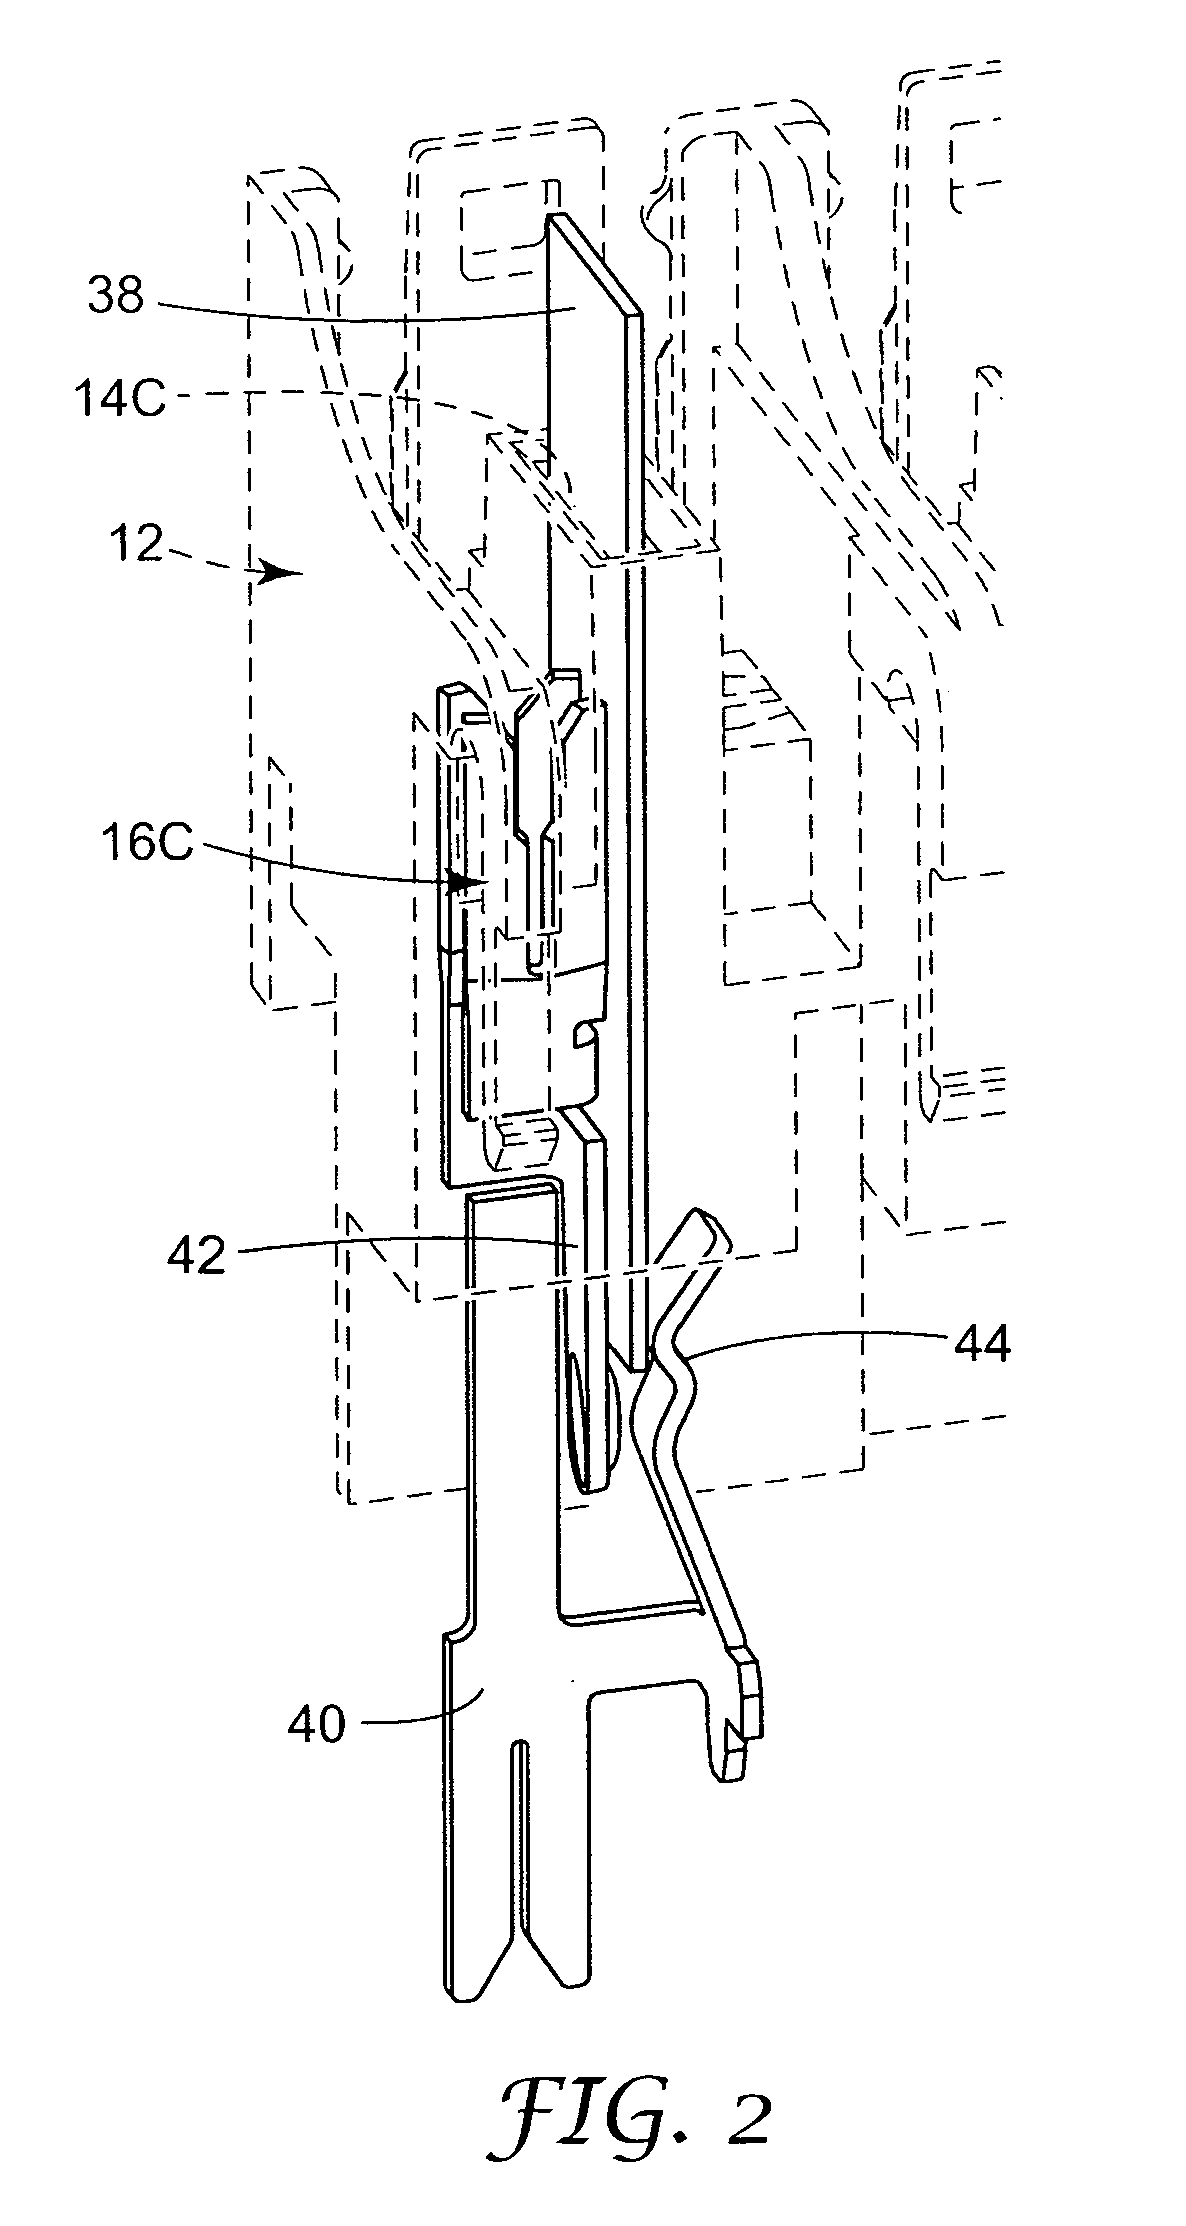 Access cover configured to receive a testing device